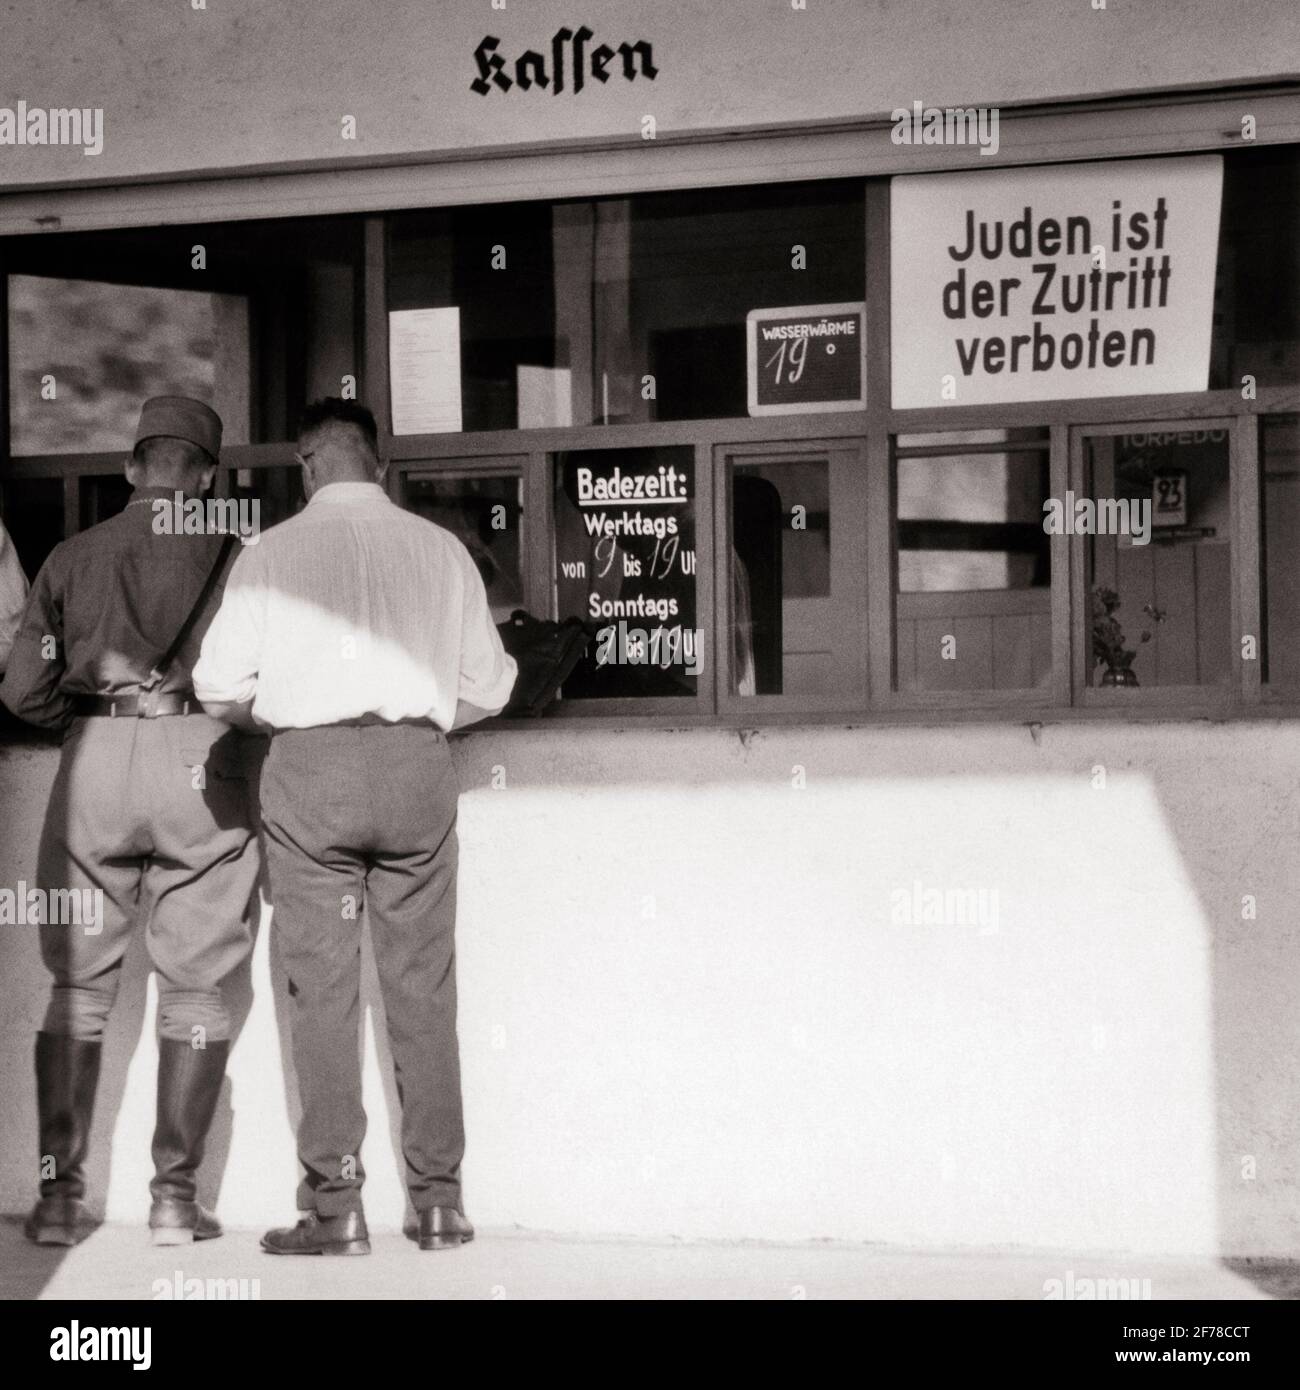 1930s 1940s TWO MEN ONE IN NAZI HAT SHIRT JACK BOOTS AT COFFEE SHOP SIGN IN WINDOW SAYS ADMISSION OF JEWS IS FORBIDDEN GERMANY - s5962 HAR001 HARS FULL-LENGTH GERMANY PERSONS MALES RISK B&W SADNESS IS DISASTER RELIGIOUS EXTERIOR FORBIDDEN ARE AT IN OF ADMISSION POLITICS CONCEPTUAL NAZI FASCIST PERSECUTION ADMITTANCE FASCISM SAYS ANTI-SEMITISM BLACK AND WHITE CAUCASIAN ETHNICITY HAR001 OLD FASHIONED RESTRICTED Stock Photo